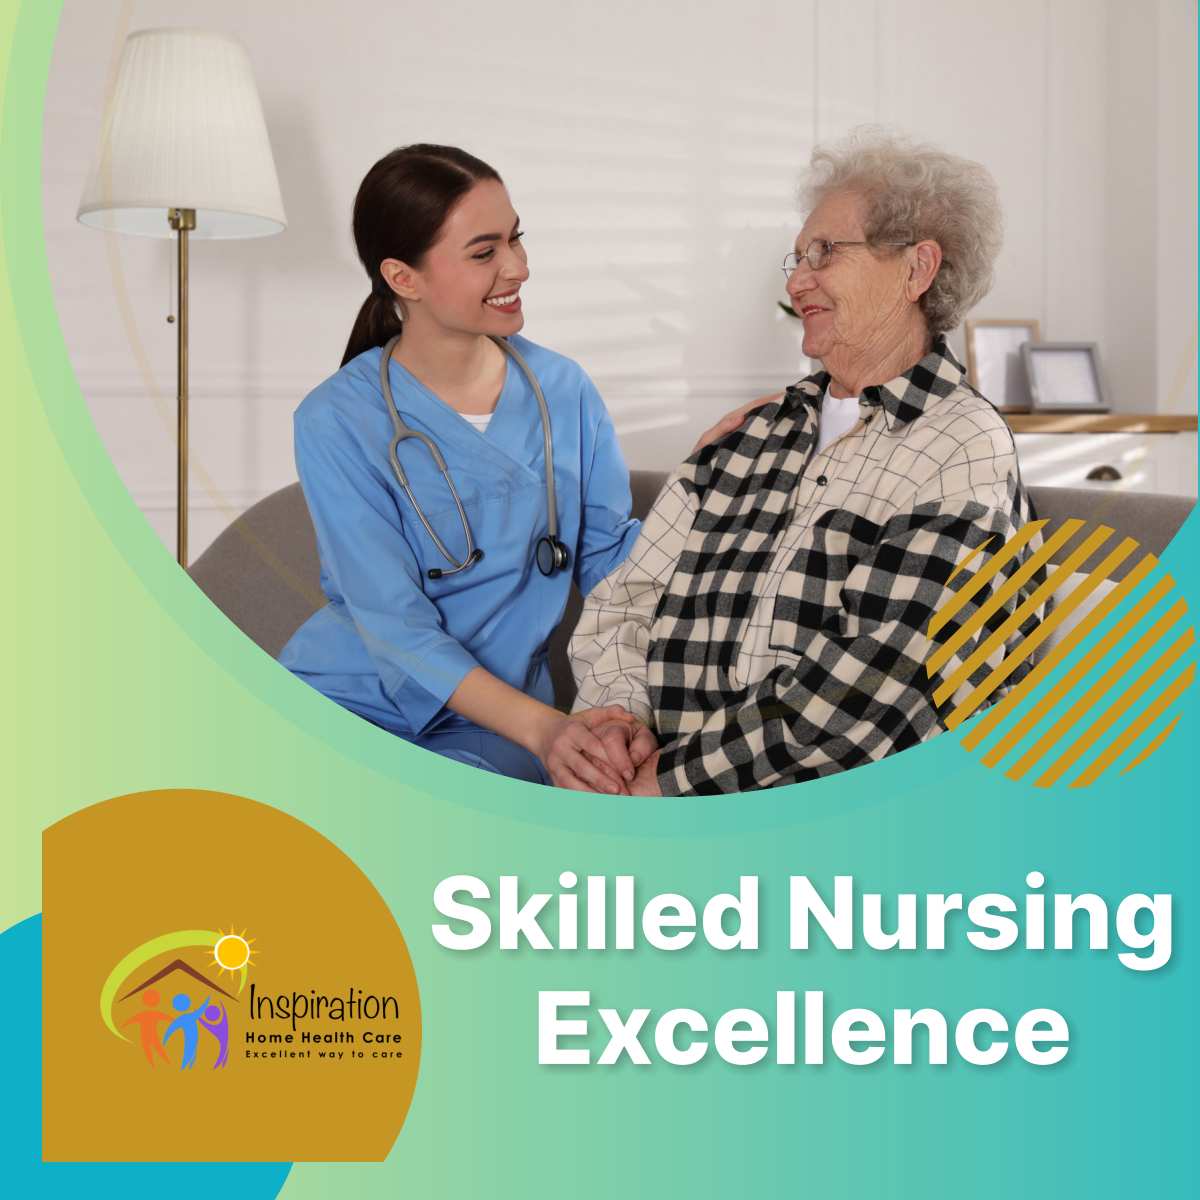 Experience top-notch care with our skilled nursing services. Our compassionate nurses work tirelessly to maintain your health and well-being, ensuring personalized care and support every step of the way. 

#AuroraCO #HomeHealthCare #InspirationHomeHealthcare #SkilledNursing